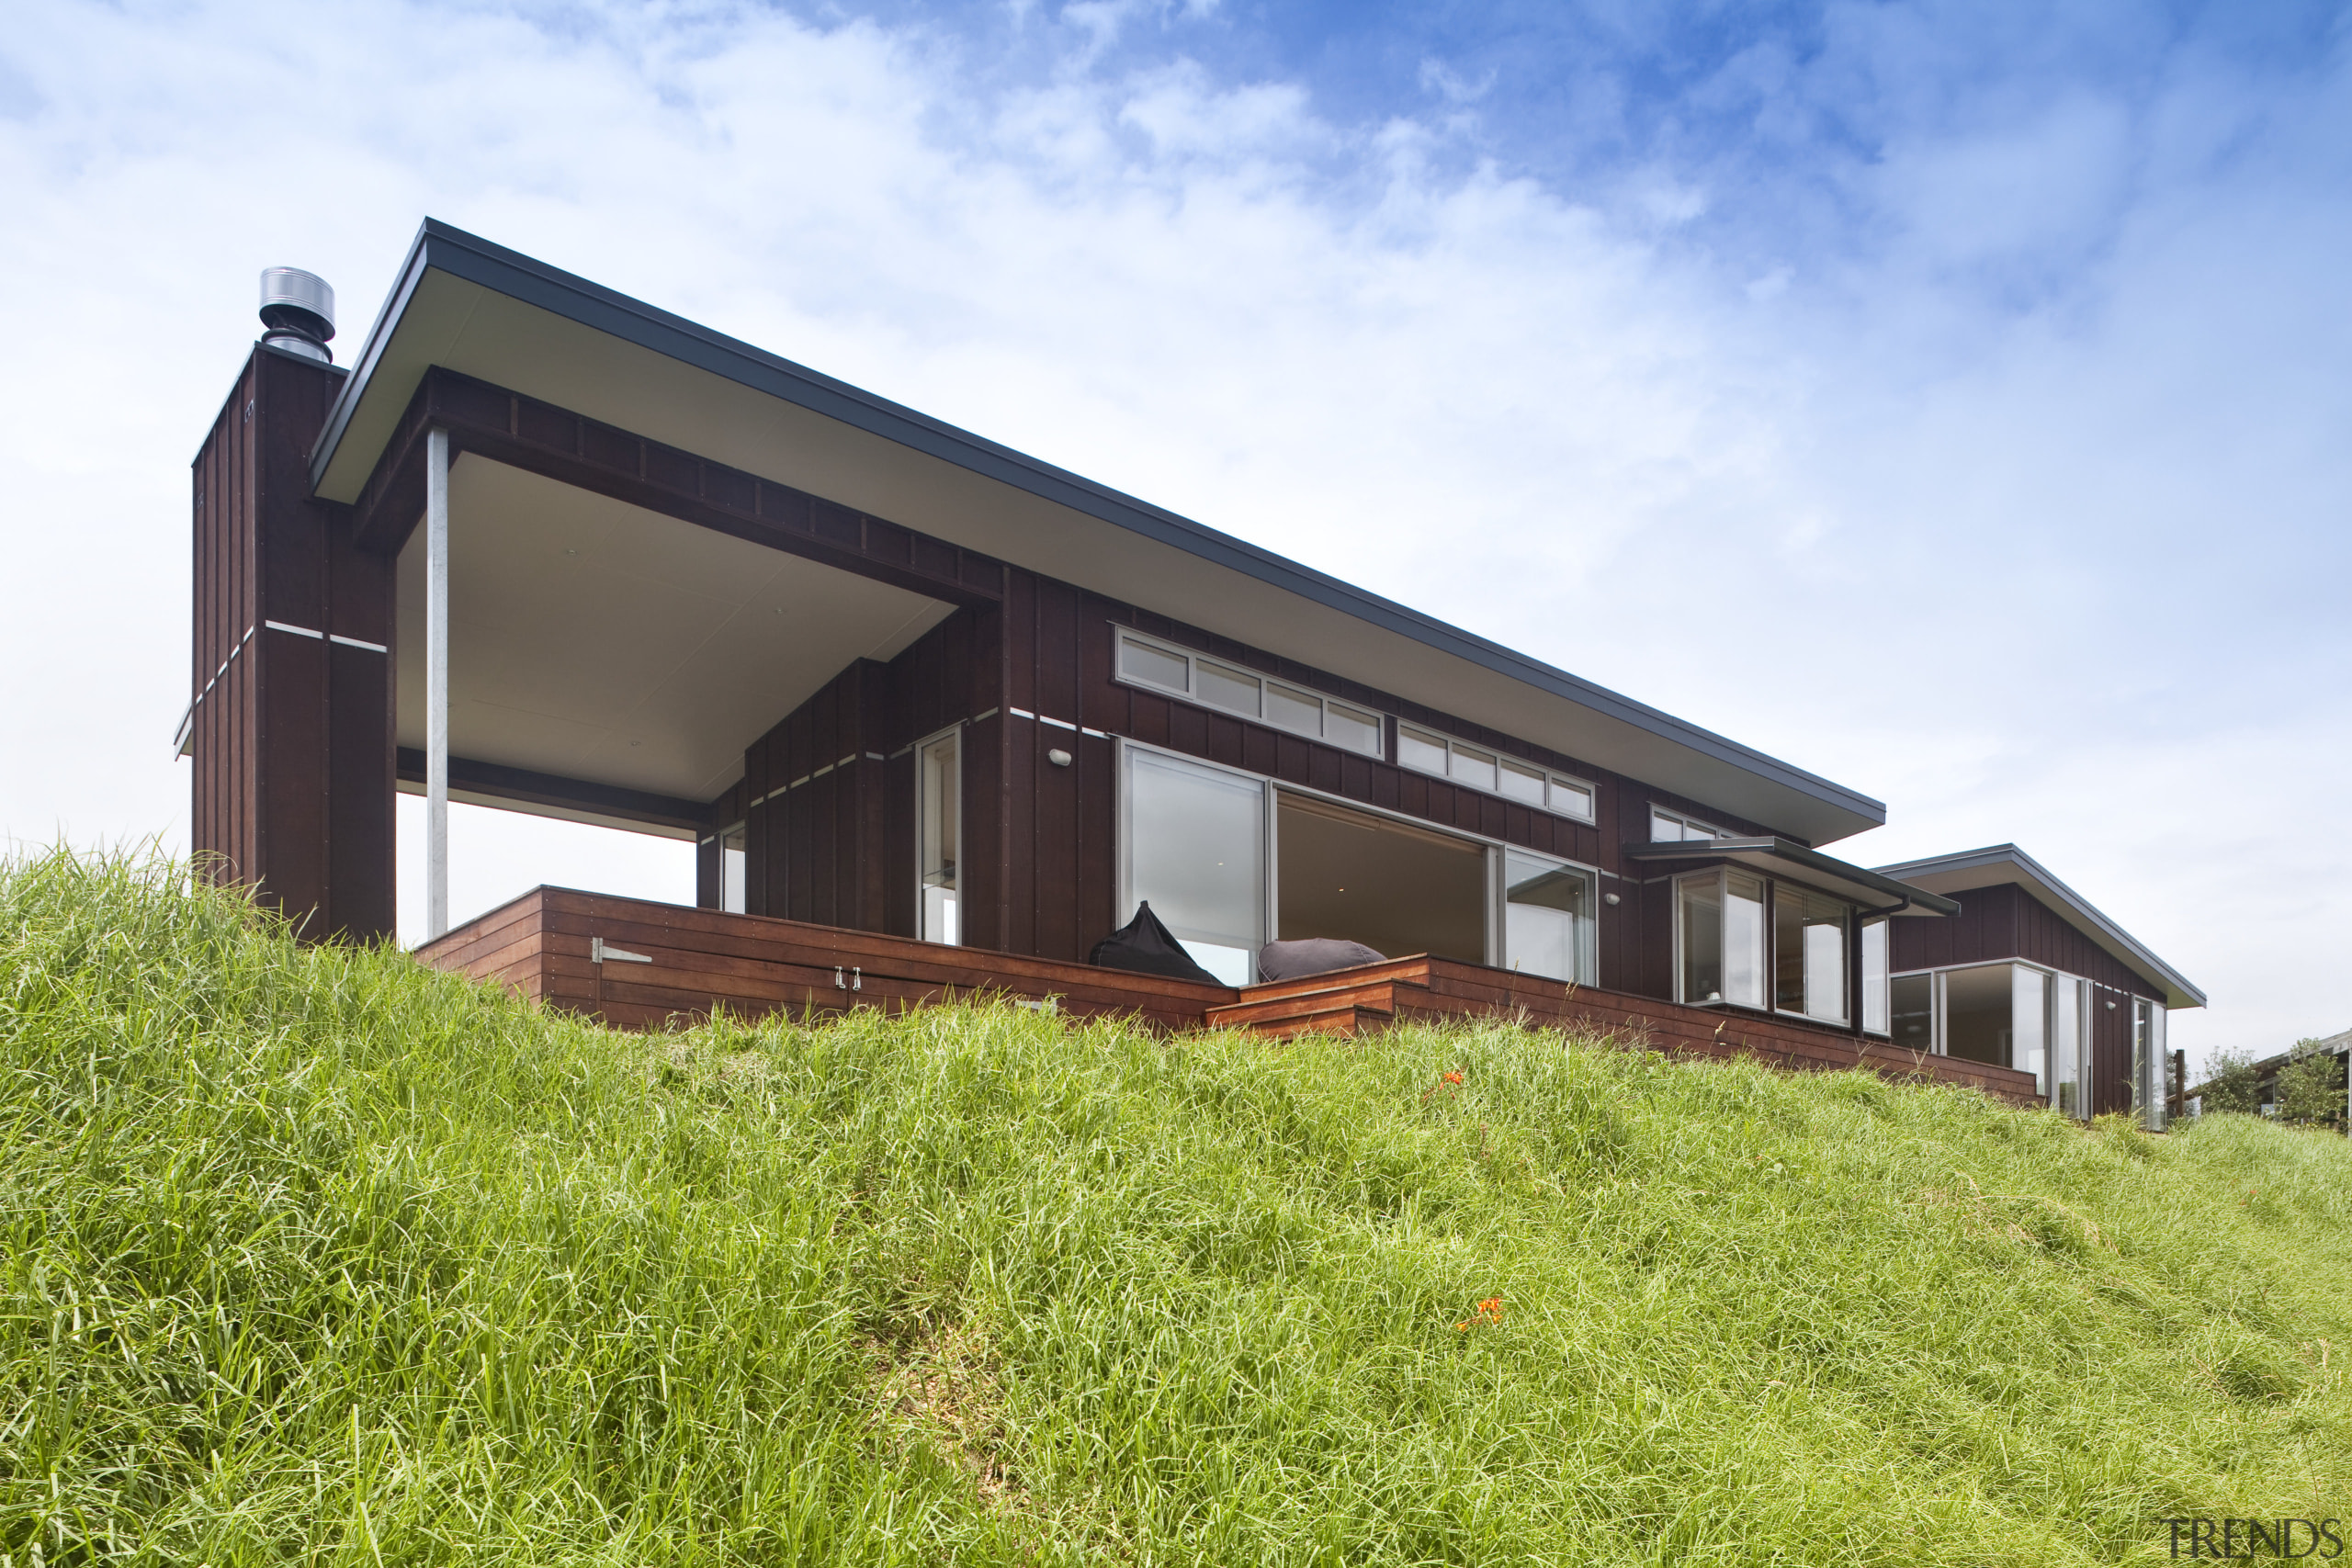 Outdoor deck house - Outdoor deck house - architecture, cottage, elevation, facade, grass, home, house, property, real estate, sky, white